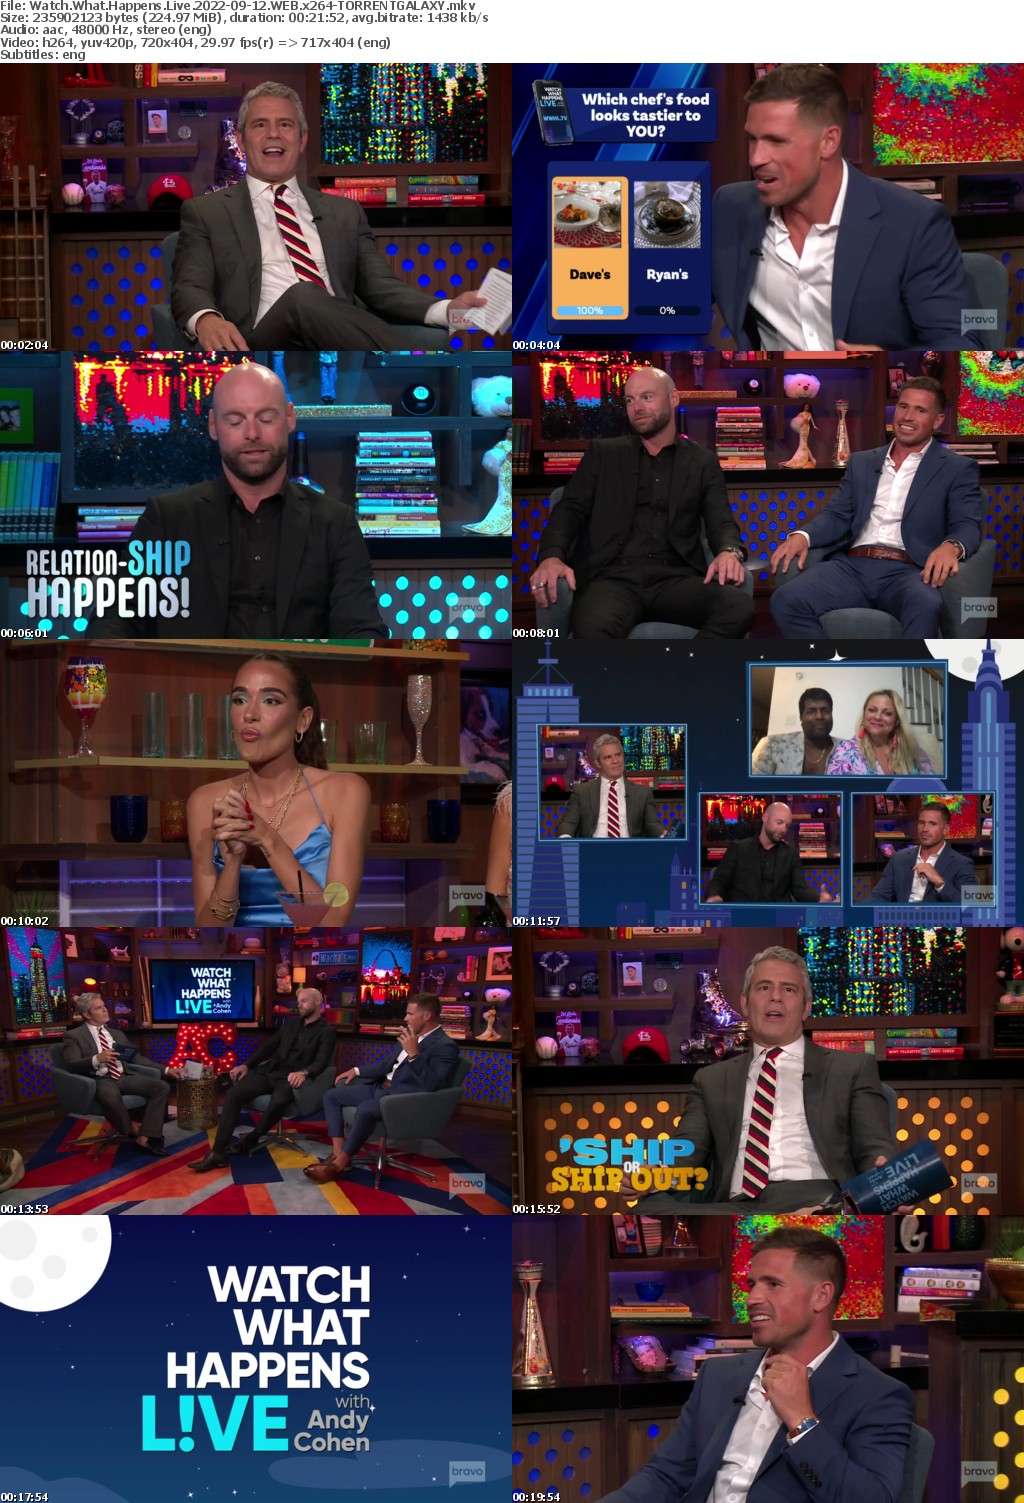 Watch What Happens Live 2022-09-12 WEB x264-GALAXY